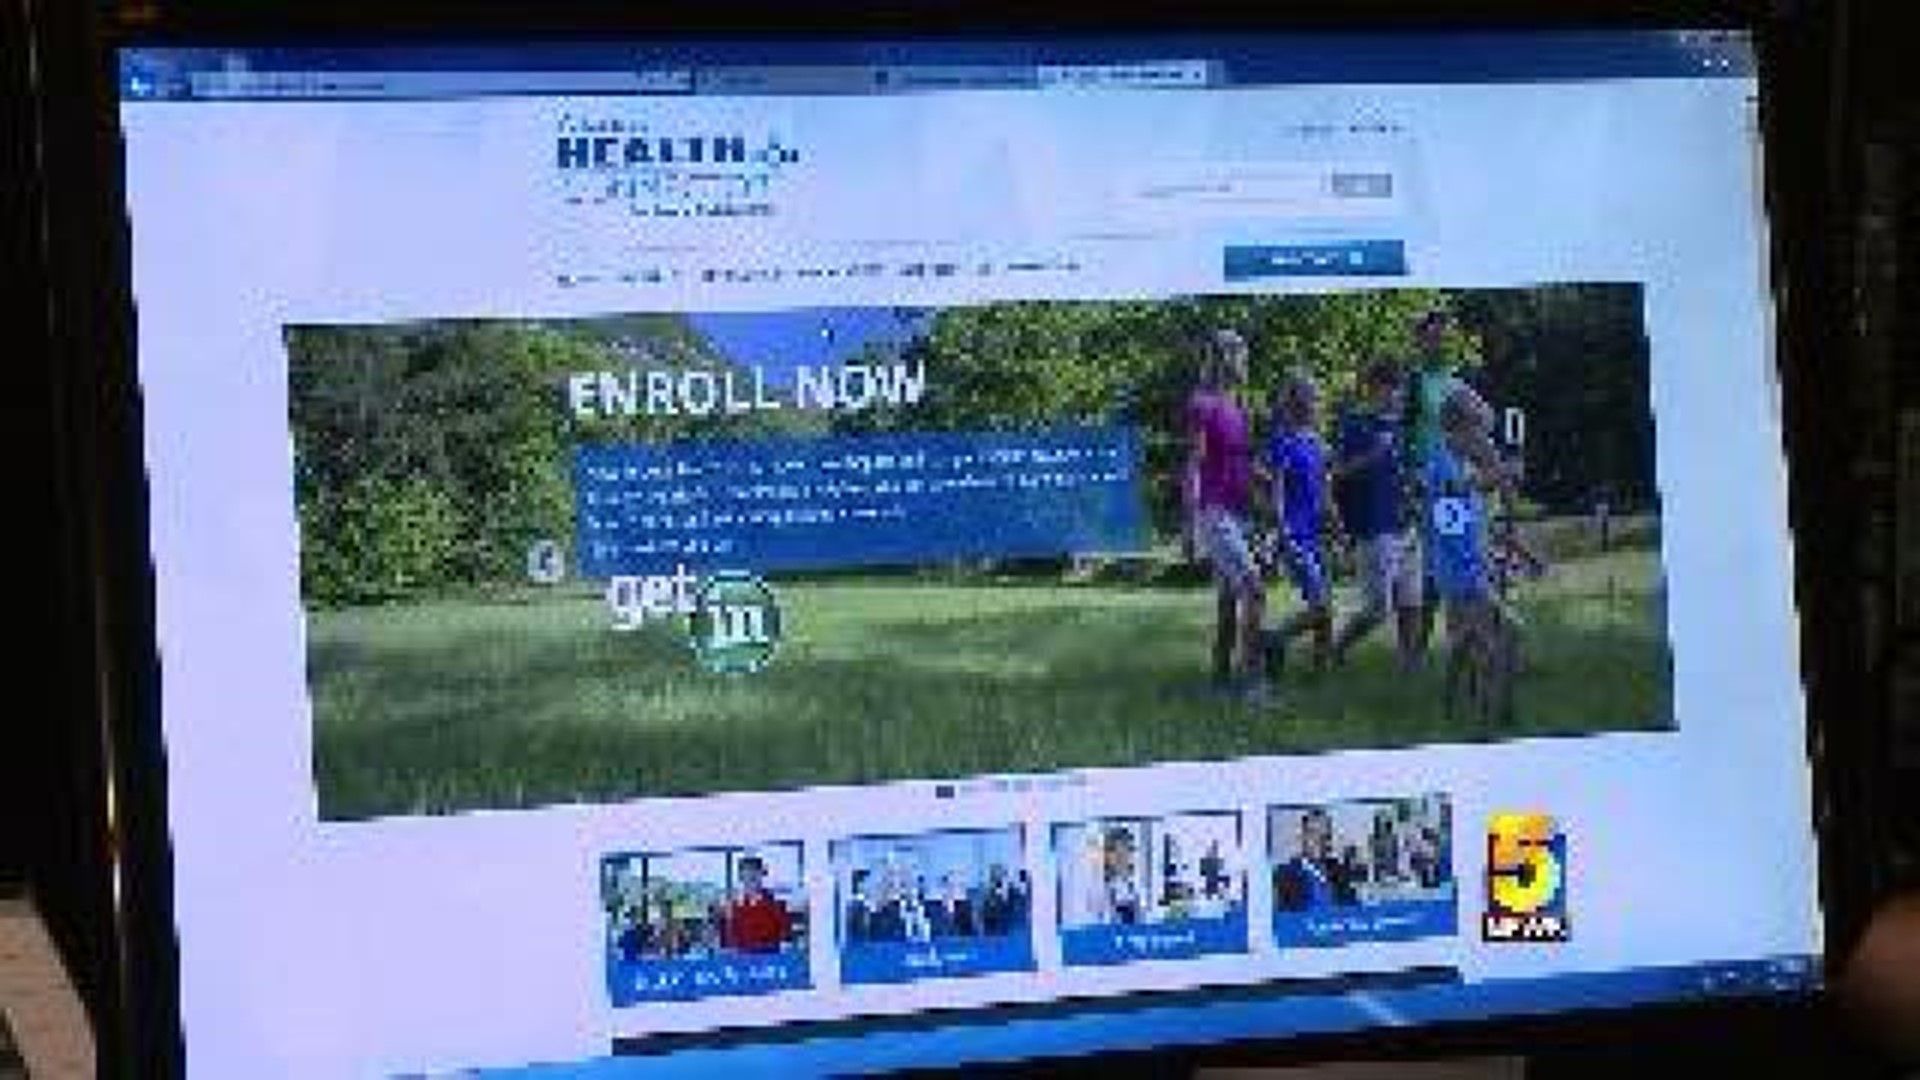 Healthcare Guides Offer Free Services to Arkansans